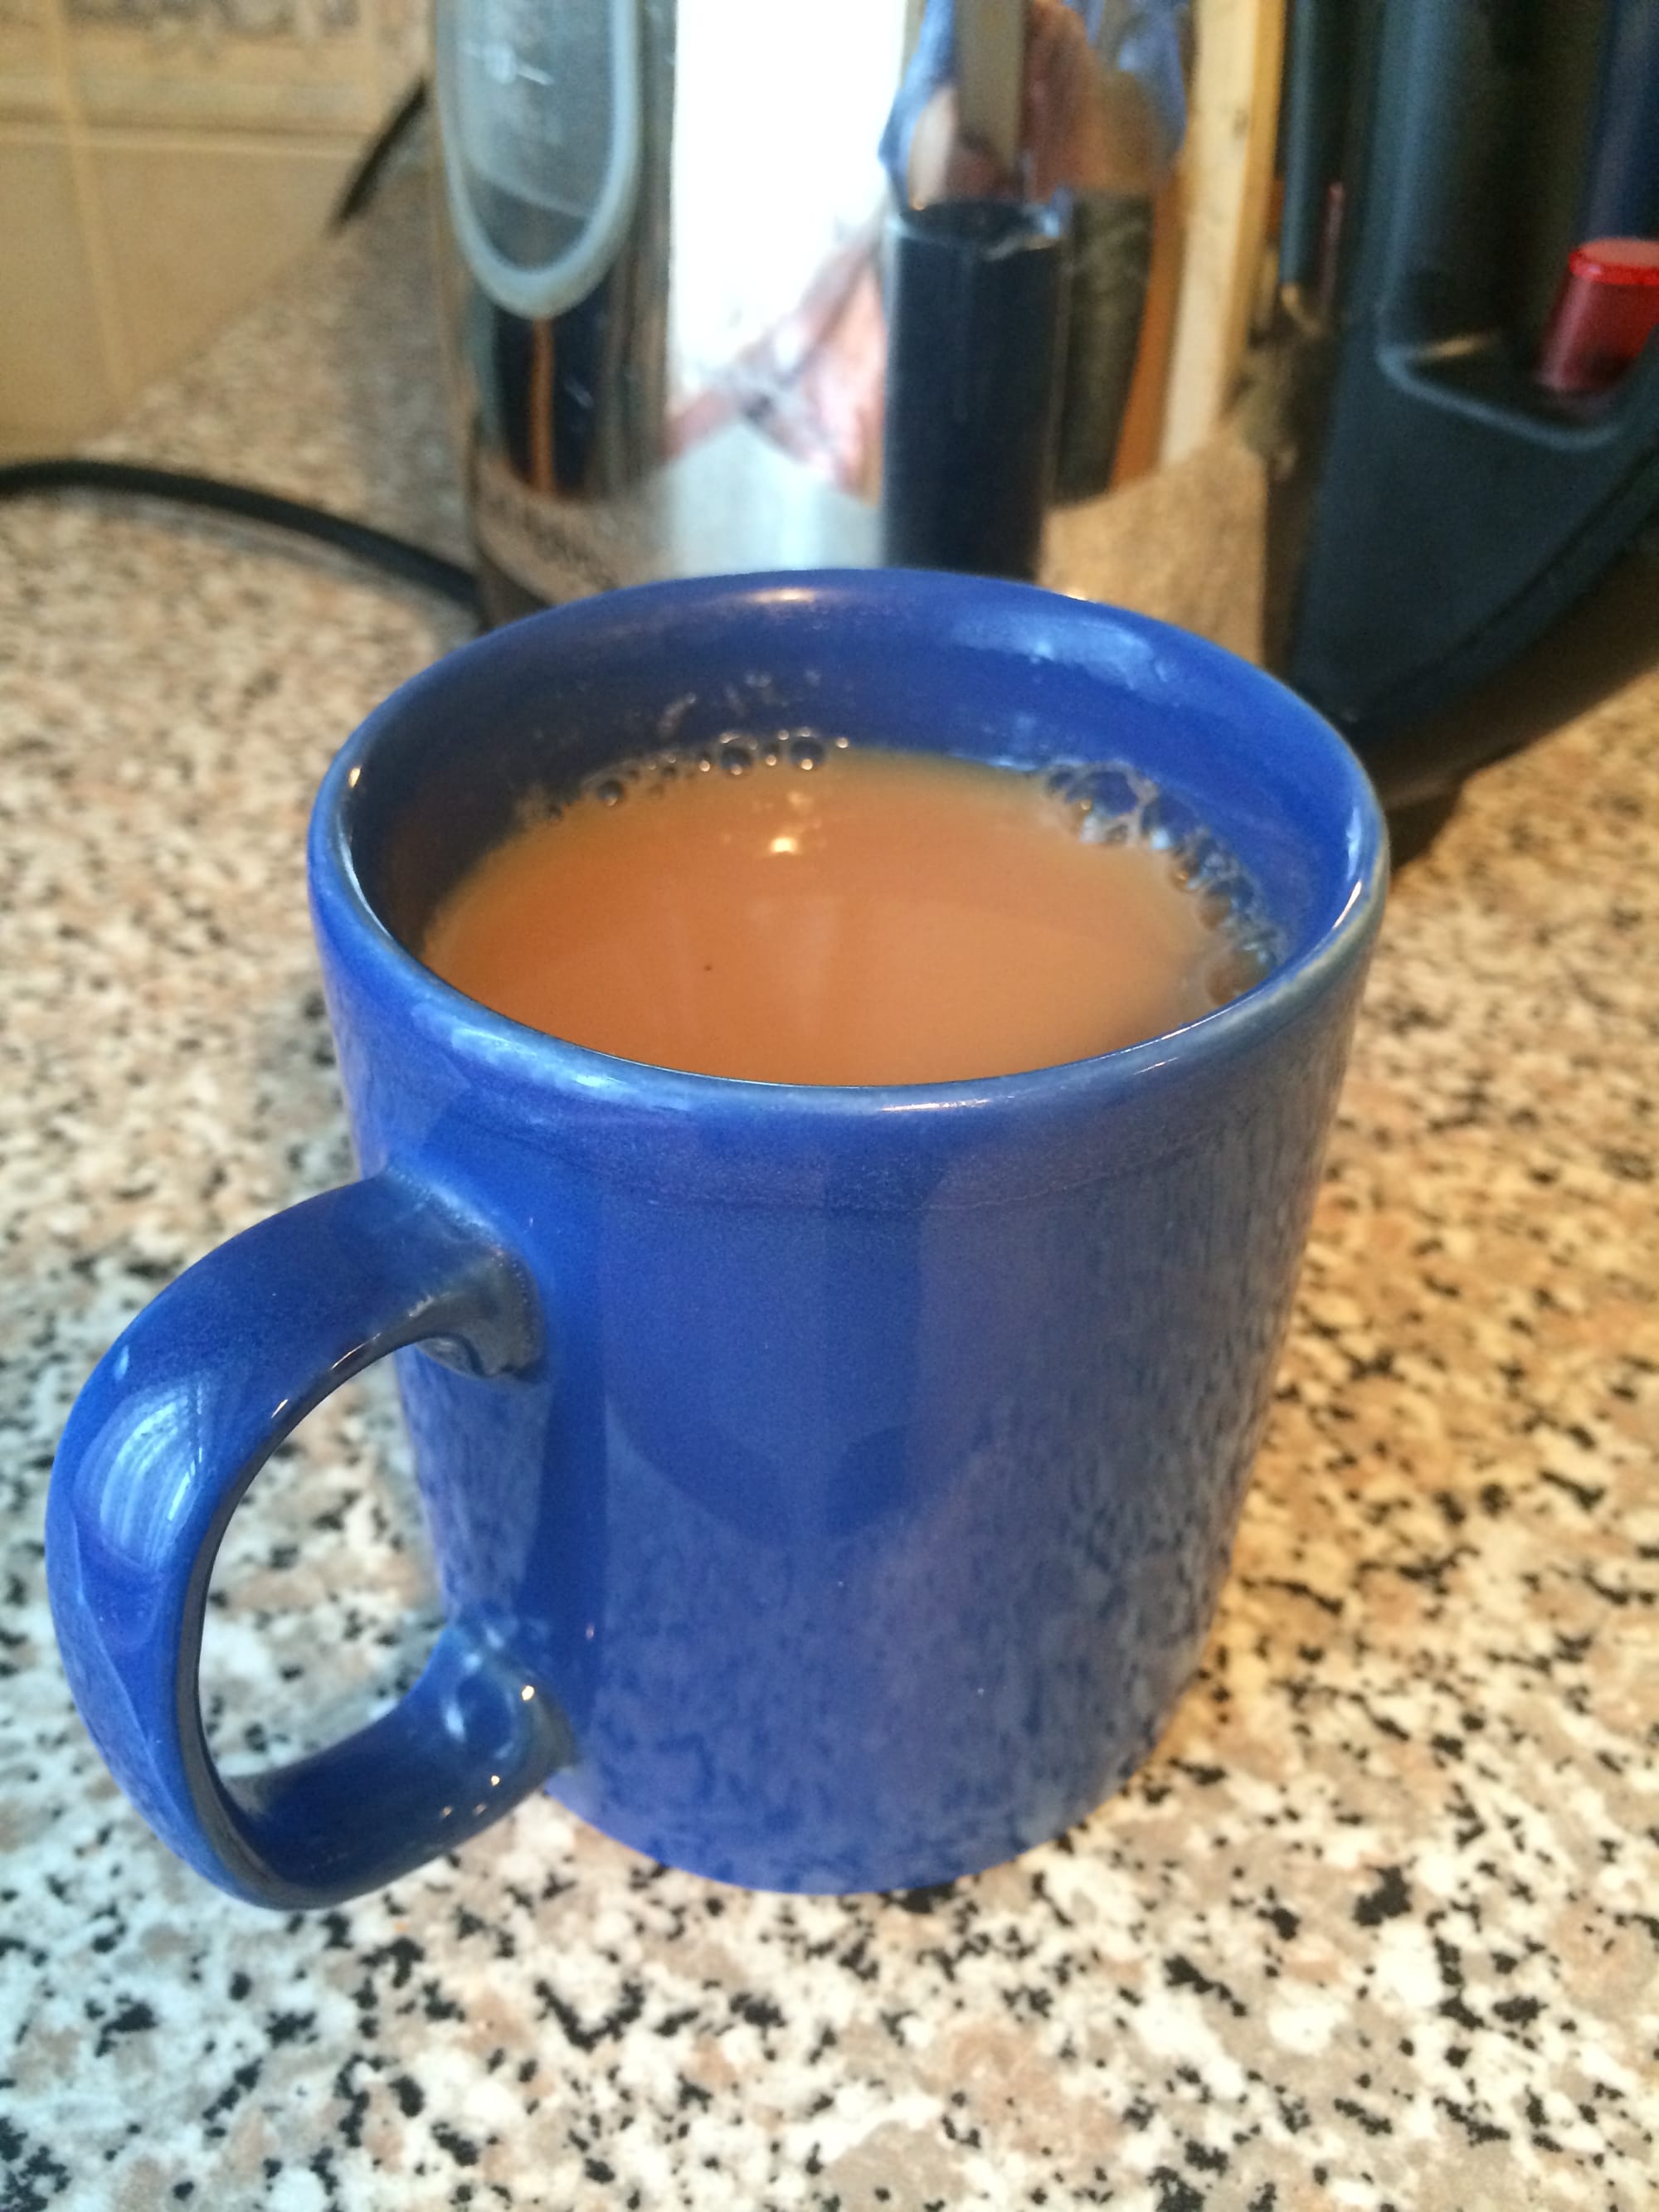 Photo by Author — back home and a cup of tea